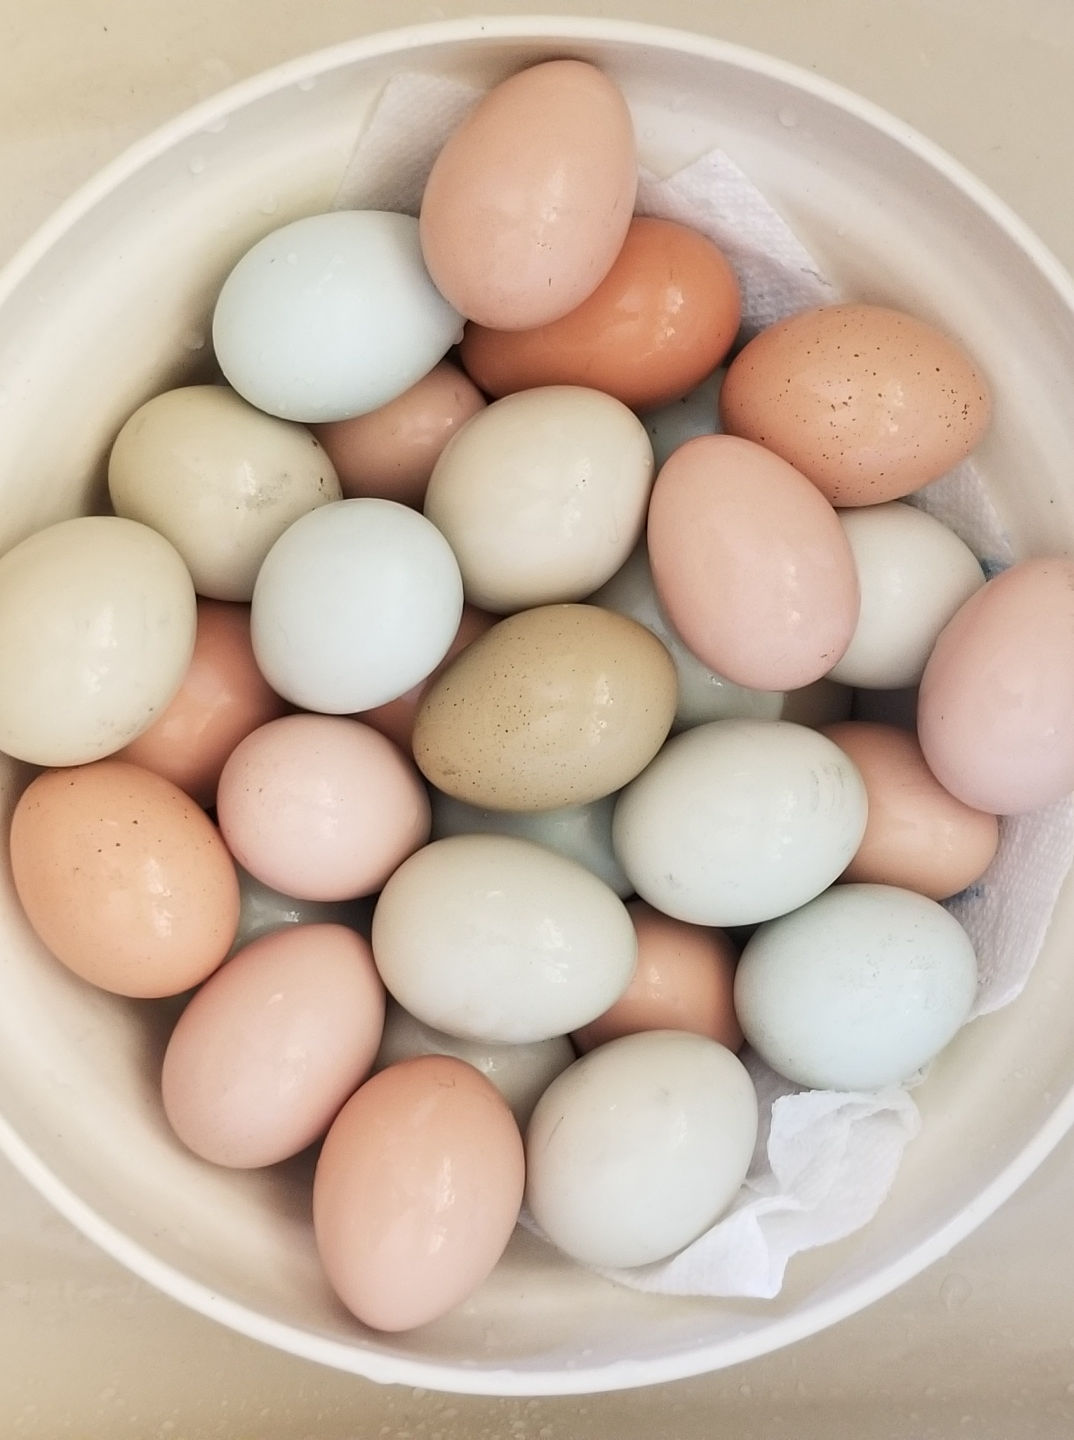 Proper Egg Handling and Storage - Fresh Eggs Daily® with Lisa Steele